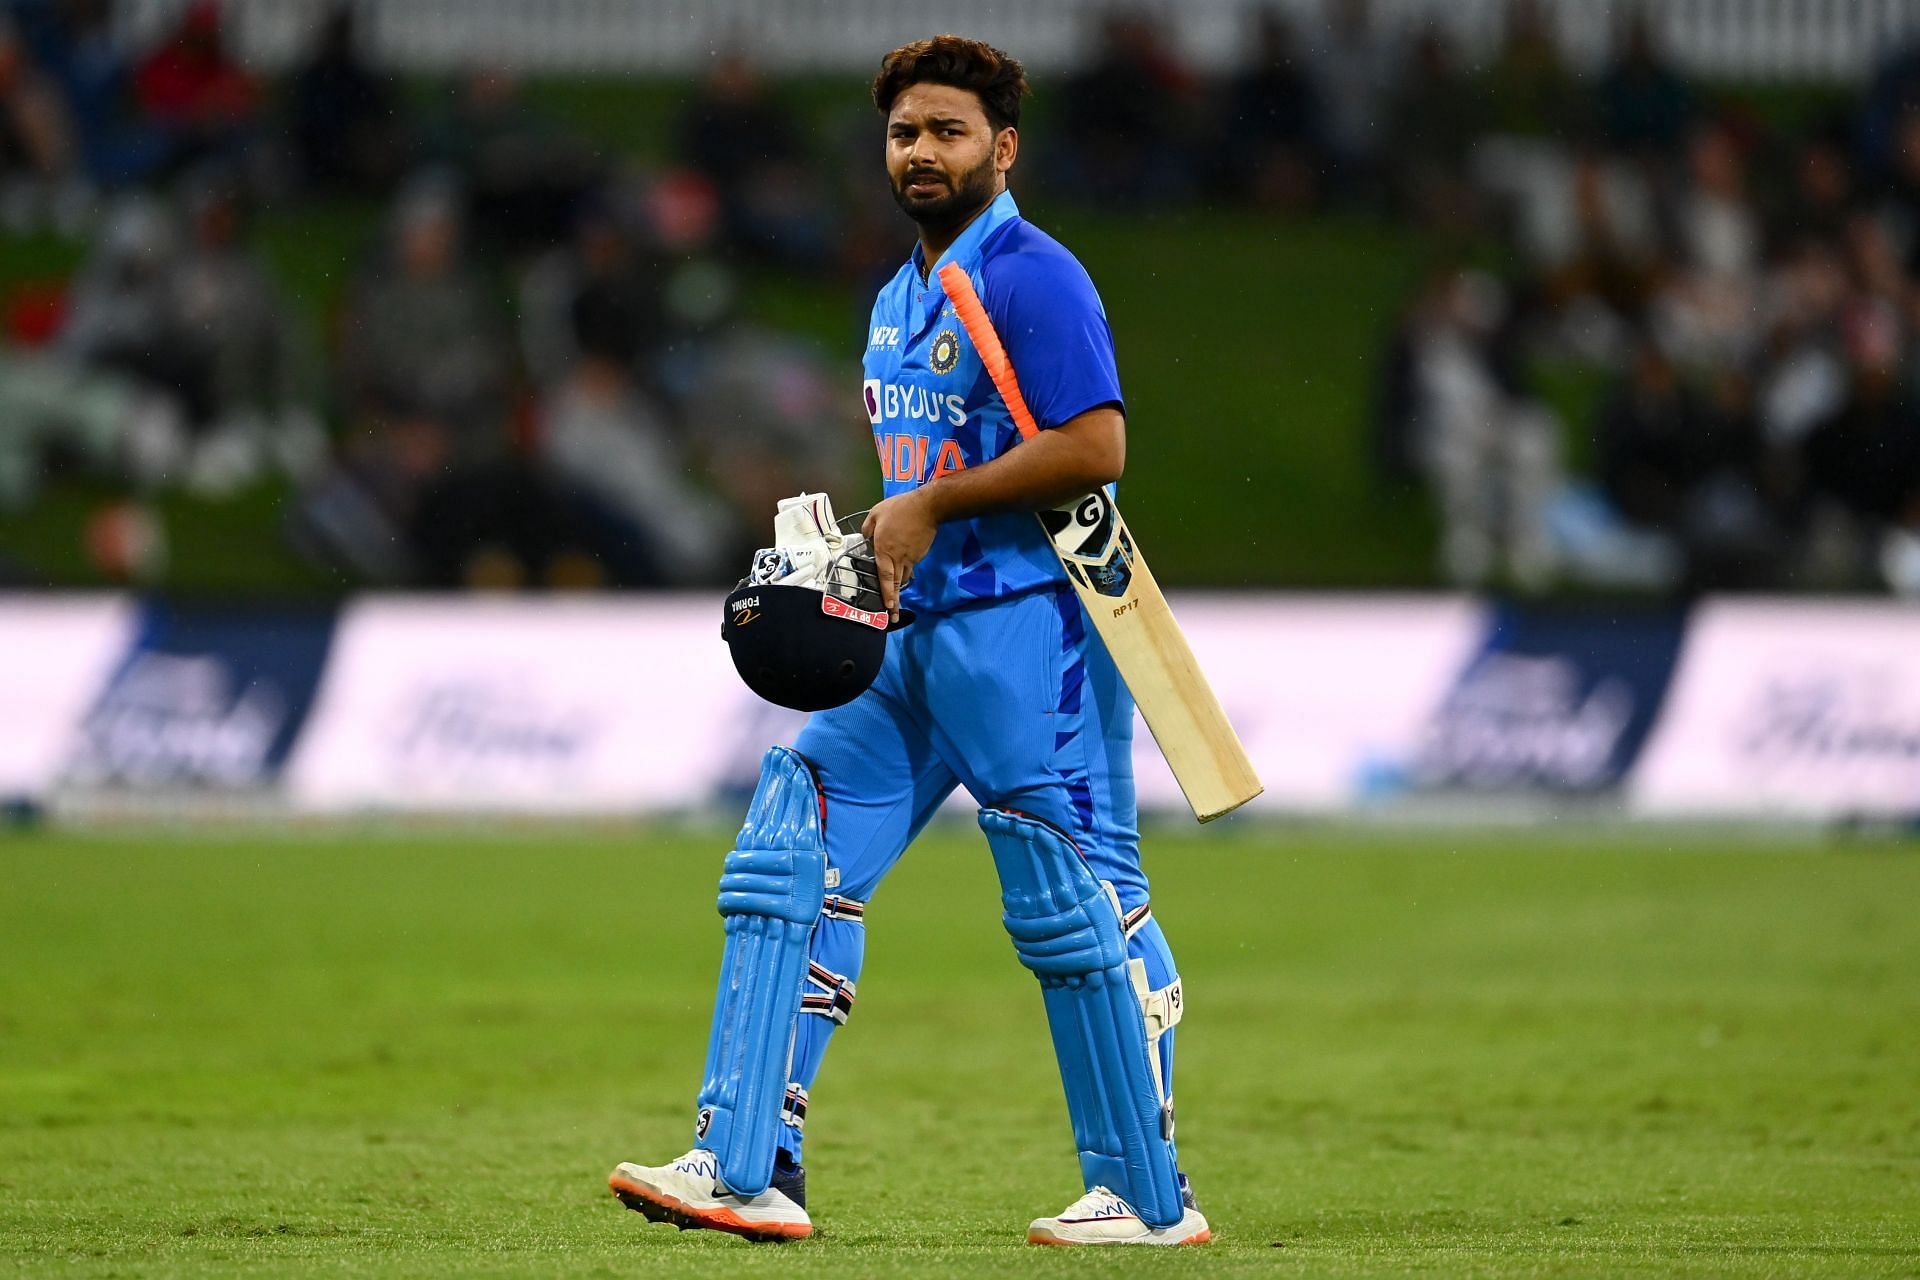 Rishabh Pant has failed to make an impact in T20Is, despite featuring in 66 games already